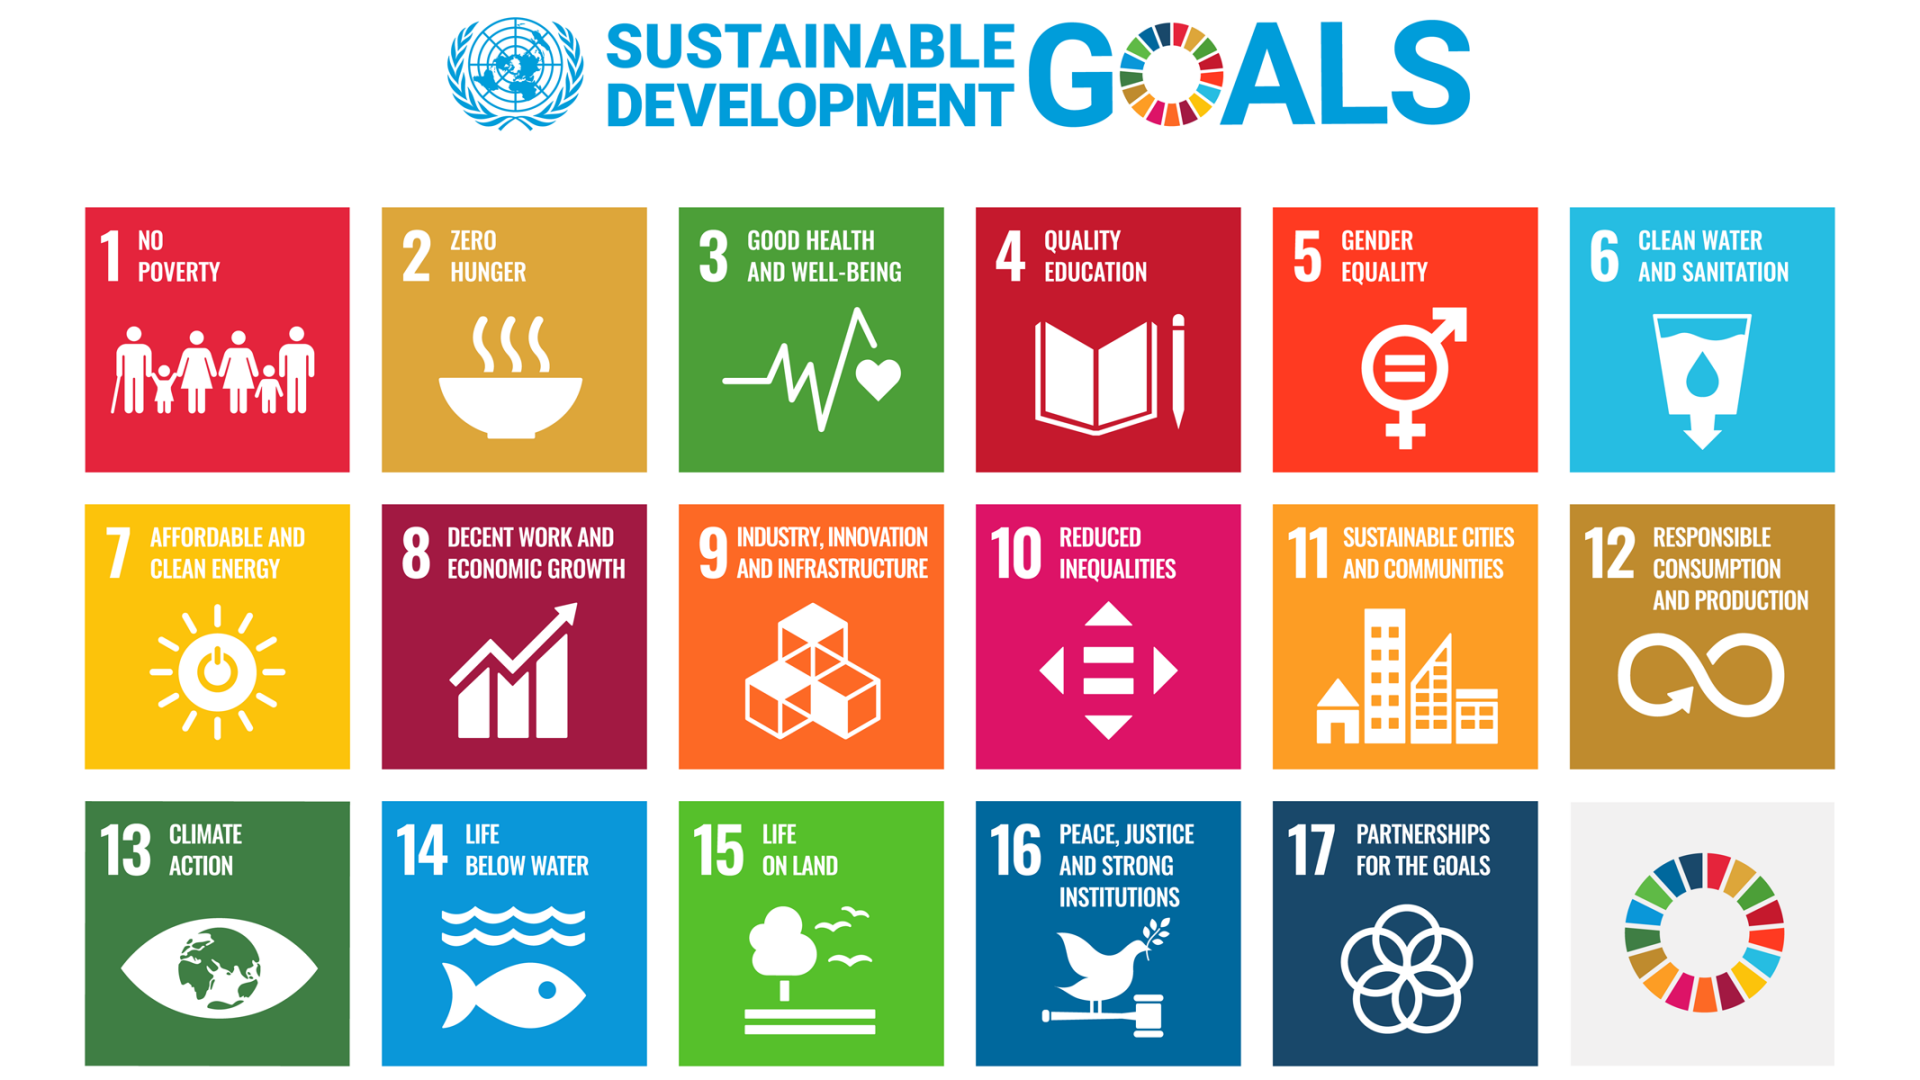 17 Sustainable Development Goals by the United Nations